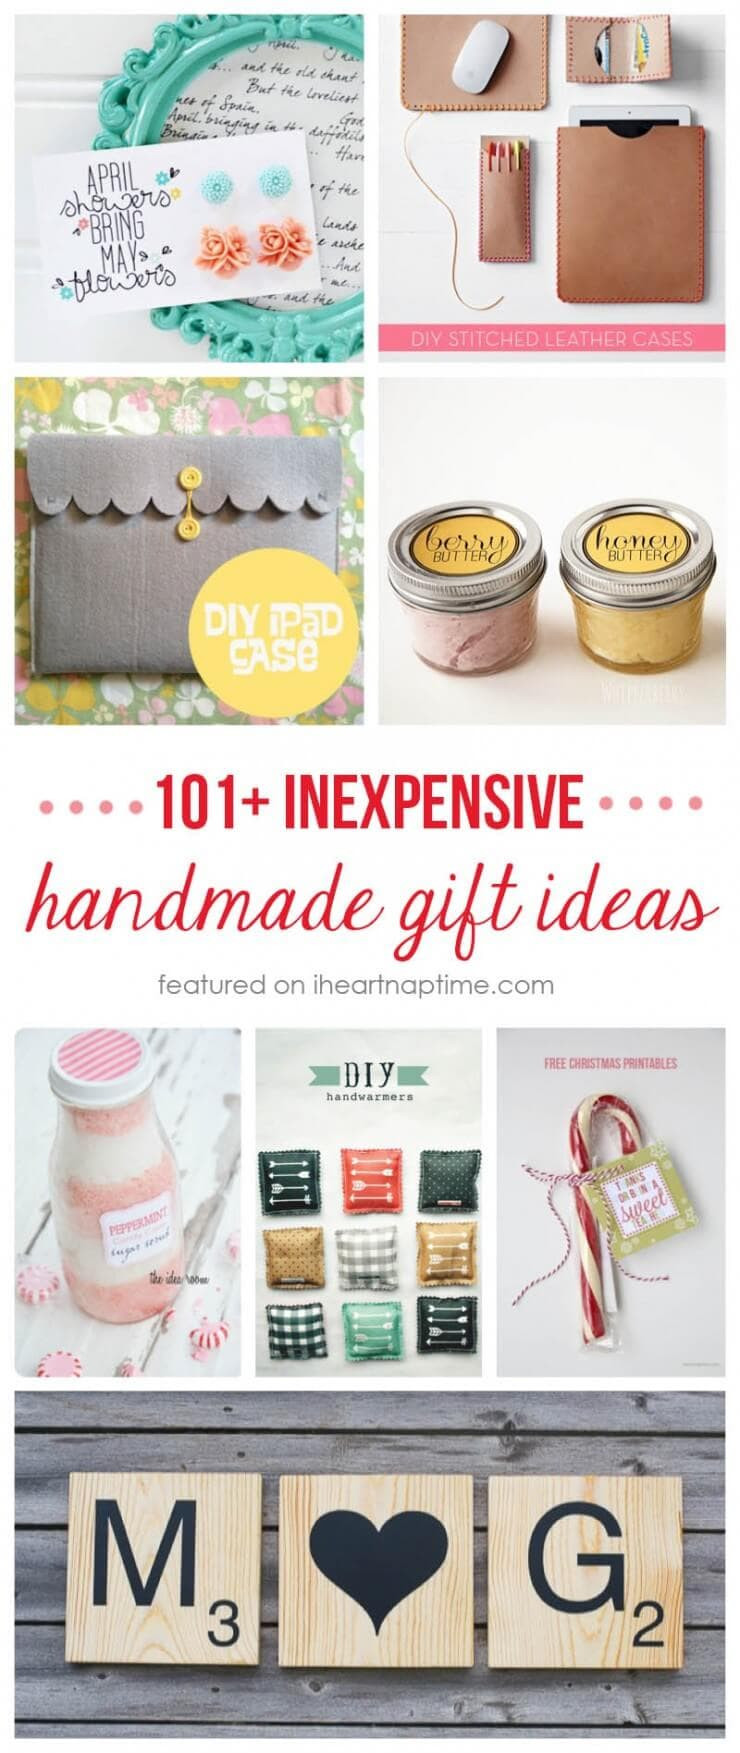 DIY Christmas Presents
 50 homemade t ideas to make for under $5 I Heart Nap Time